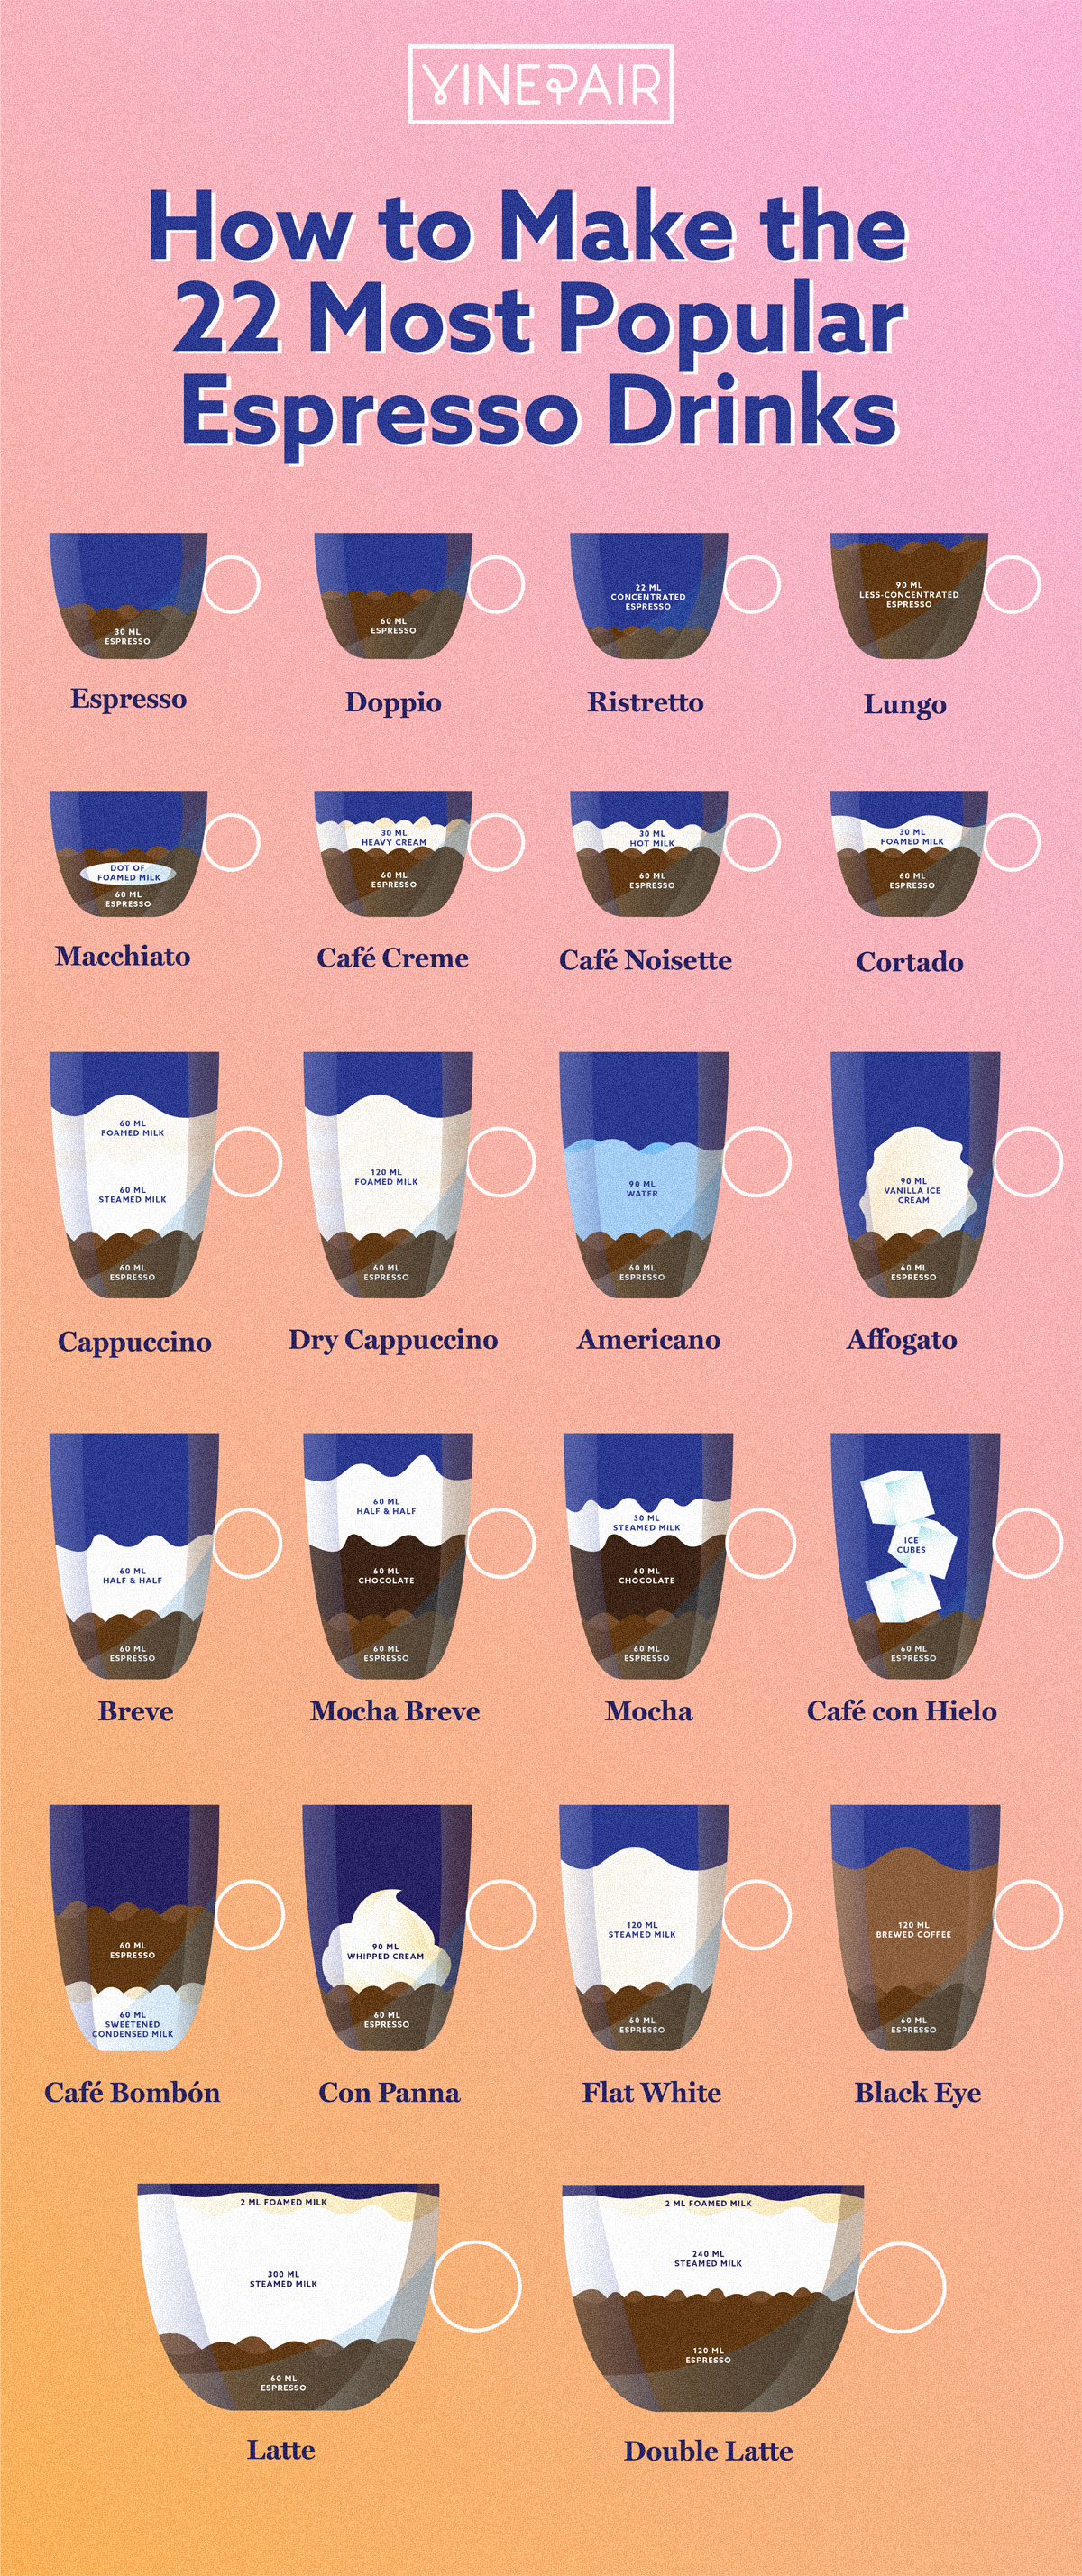 How to Make the 22 Most Popular Espresso Drinks (Infographic) | VinePair